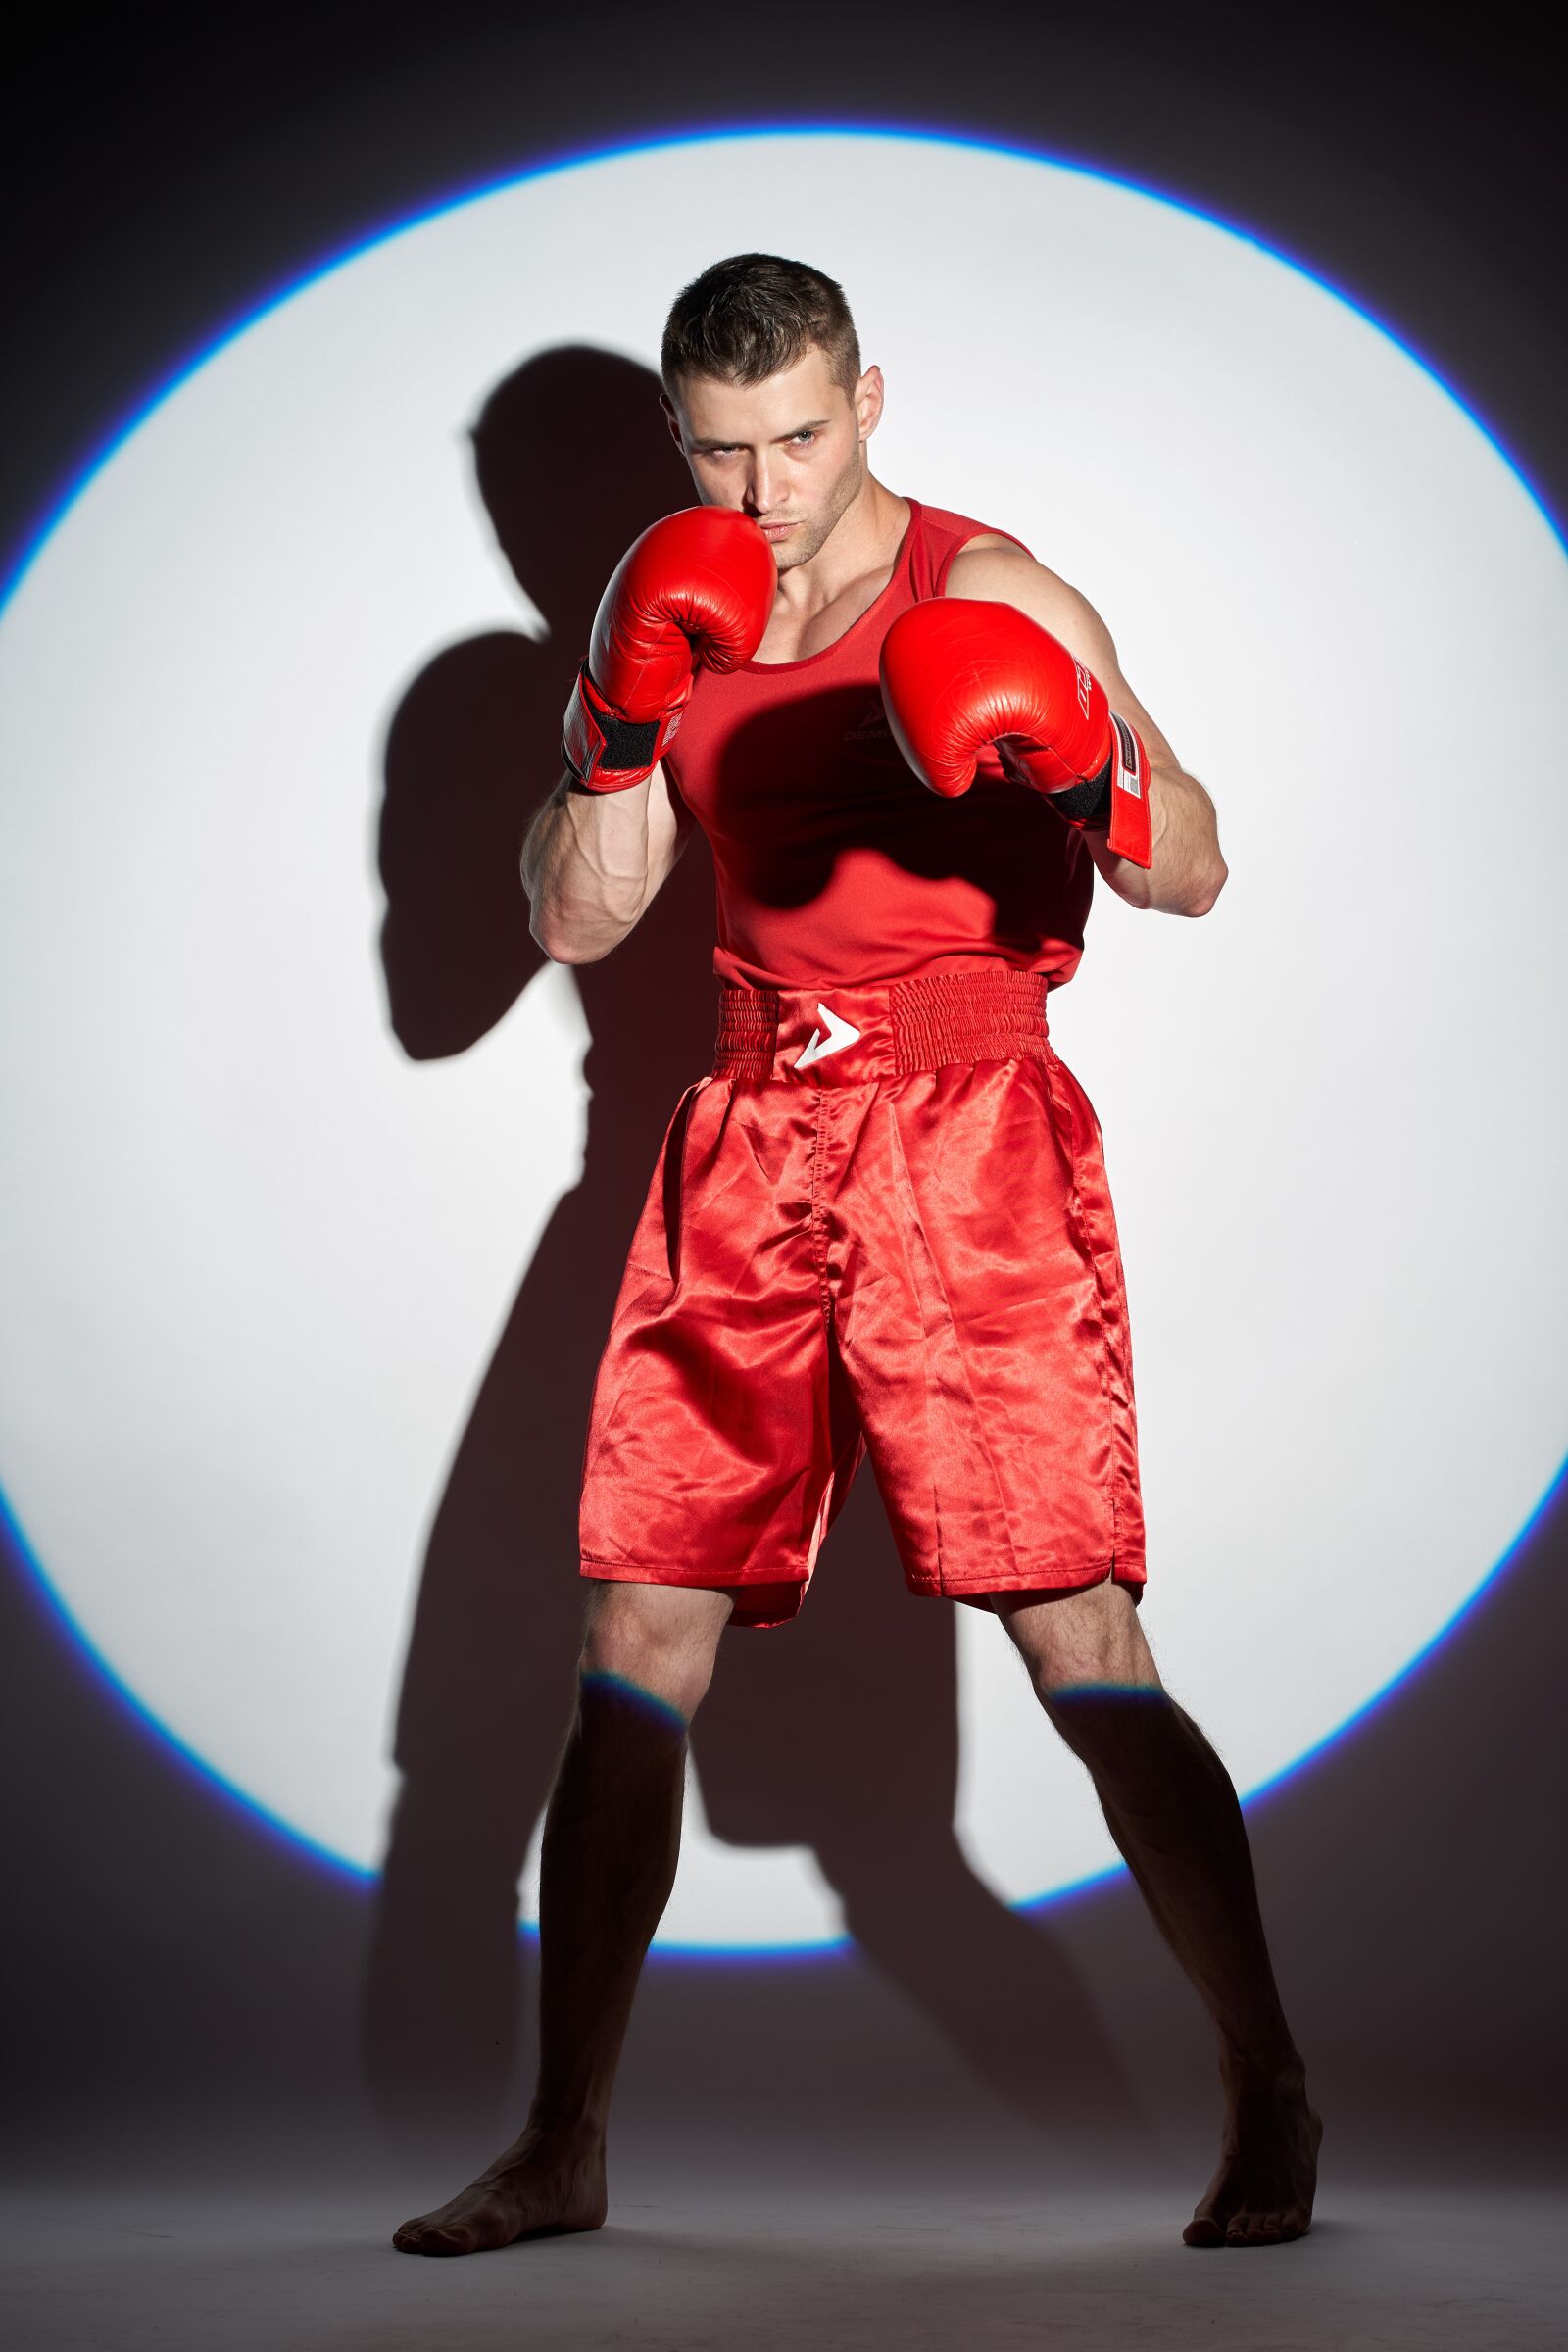 DT 100mm F2.8 SAM sample photo. Boxing, sport, sports photography